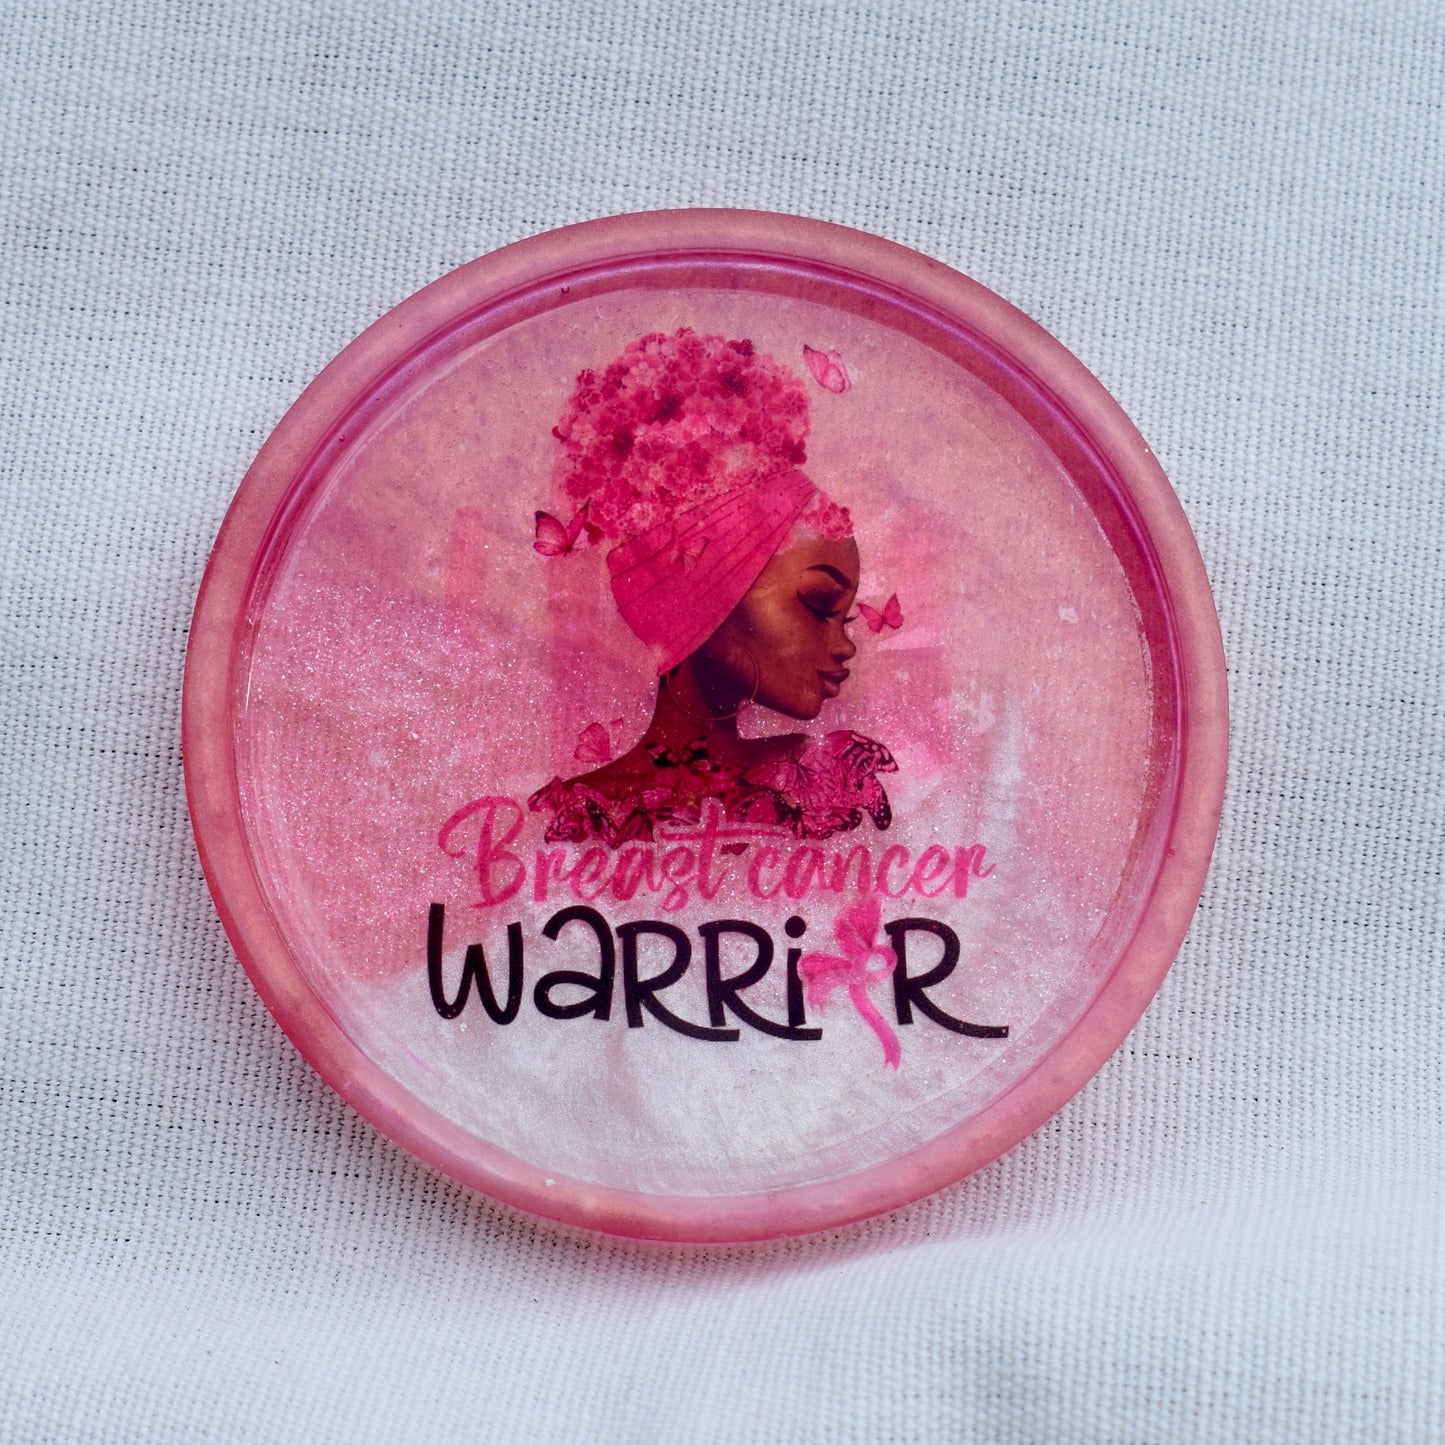 Breast Cancer Warrior Coasters 🎀 Afro Breast Cancer Coasters • Black Cancer Survivor Coasters